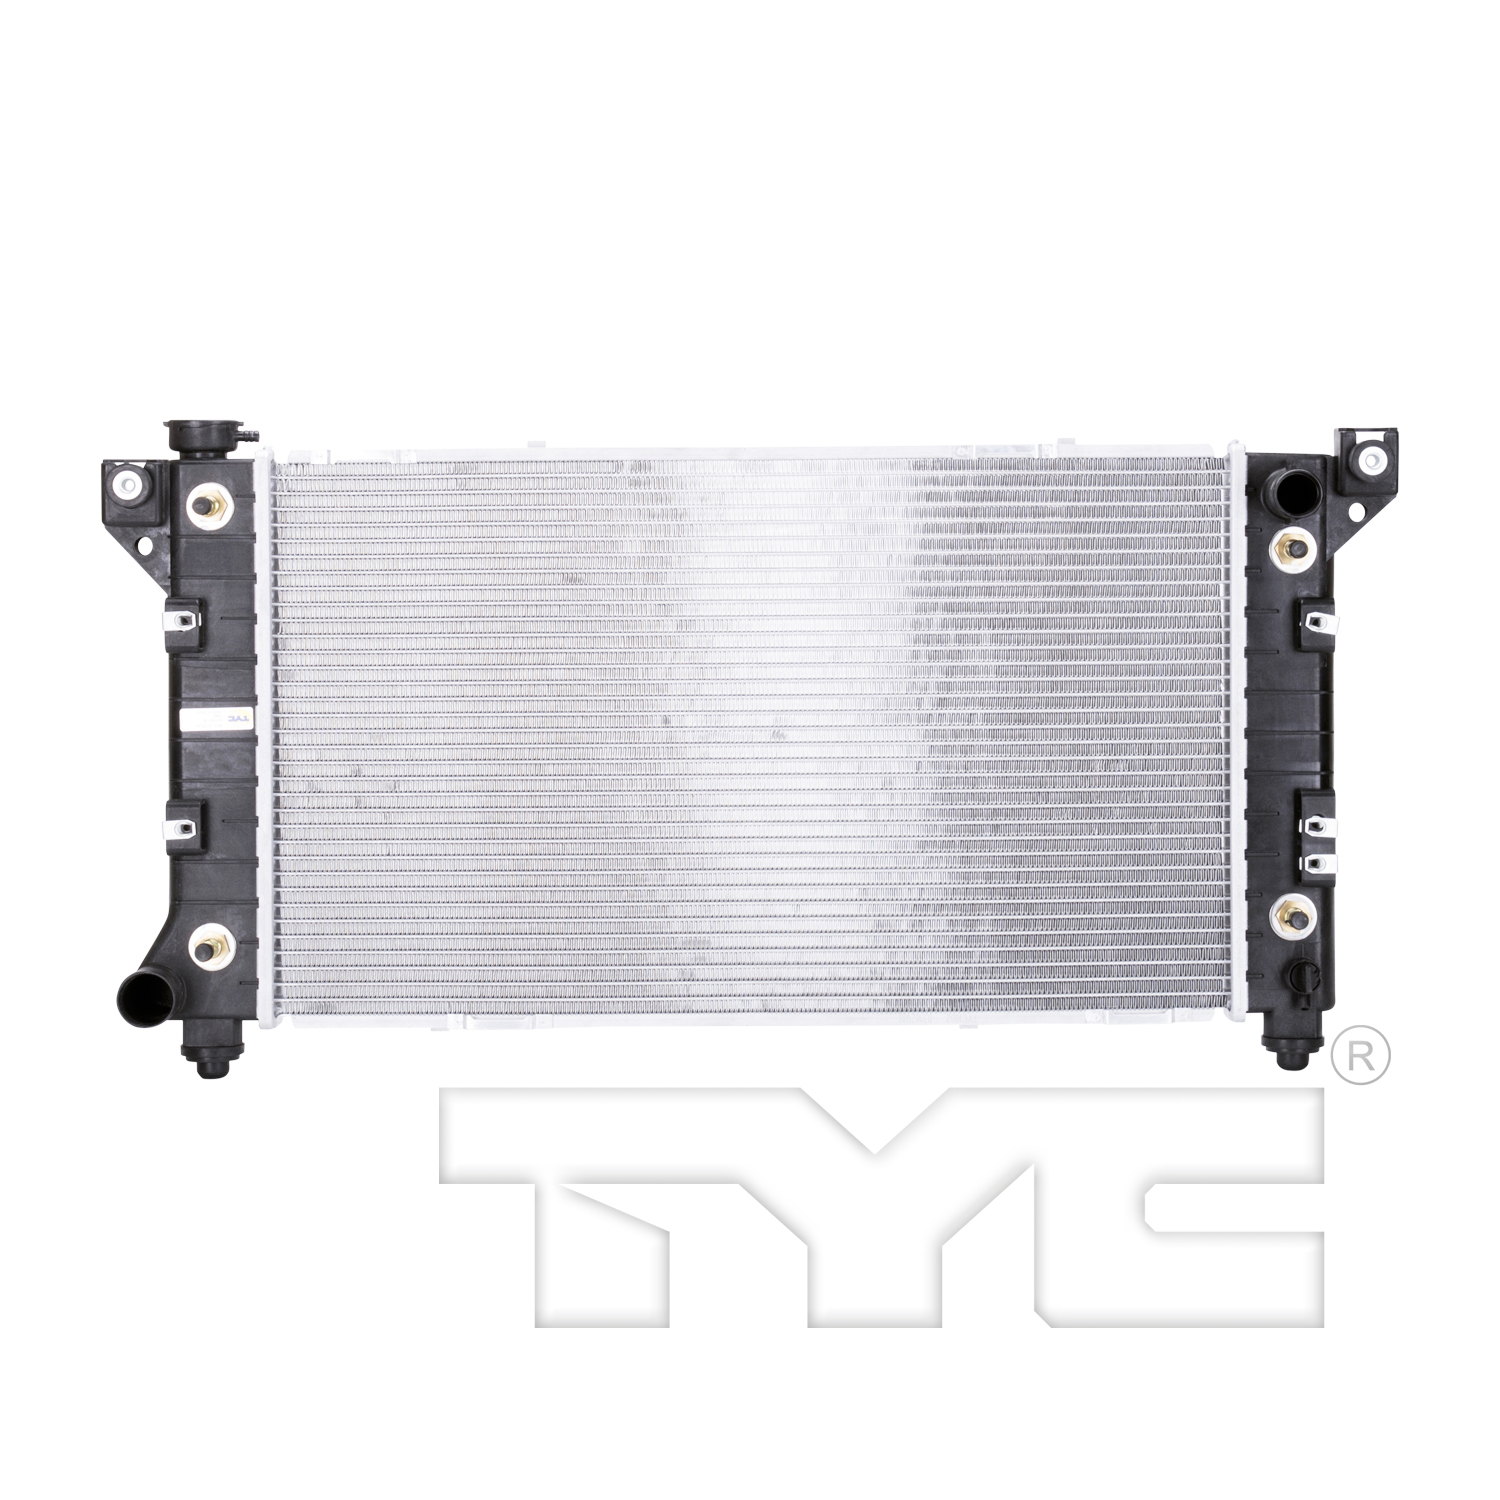 Aftermarket RADIATORS for CHRYSLER - TOWN & COUNTRY, TOWN & COUNTRY,98-00,Radiator assembly